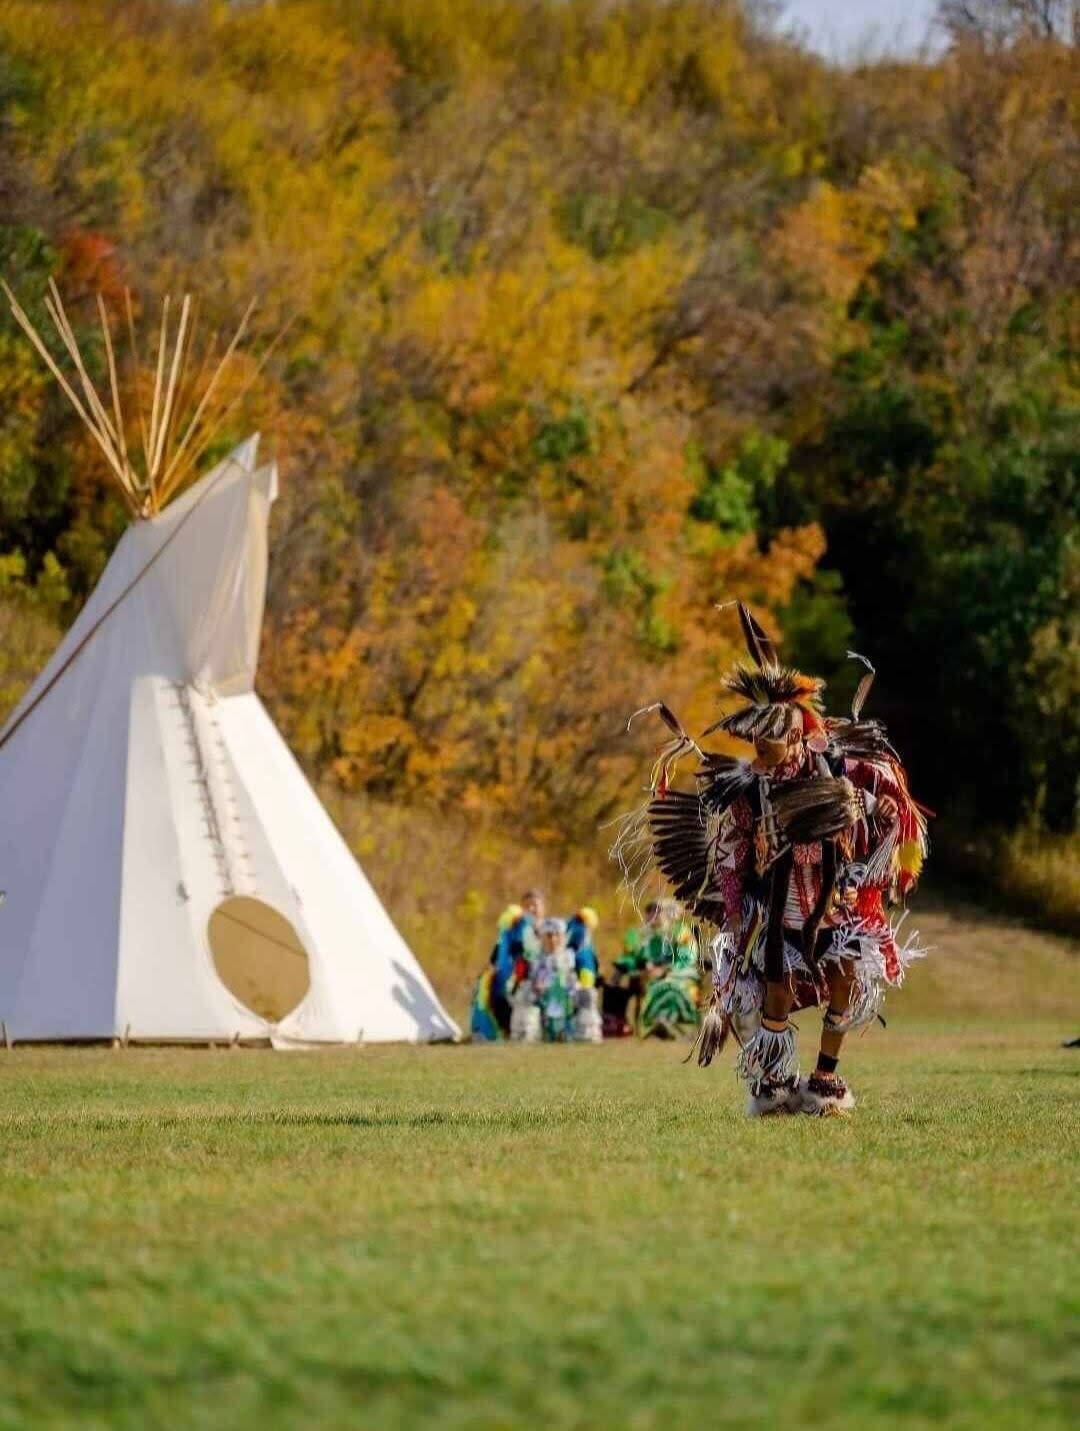 Ivan Isaac from Ochapowace First Nation says he's healing through culture and dancing powwow.  This year, he'll be initiated into the powwow circle in his home nation of Ochapowace First Nation, in southeastern Saskatchewan. (Submitted by Ivan Isaac - image credit)